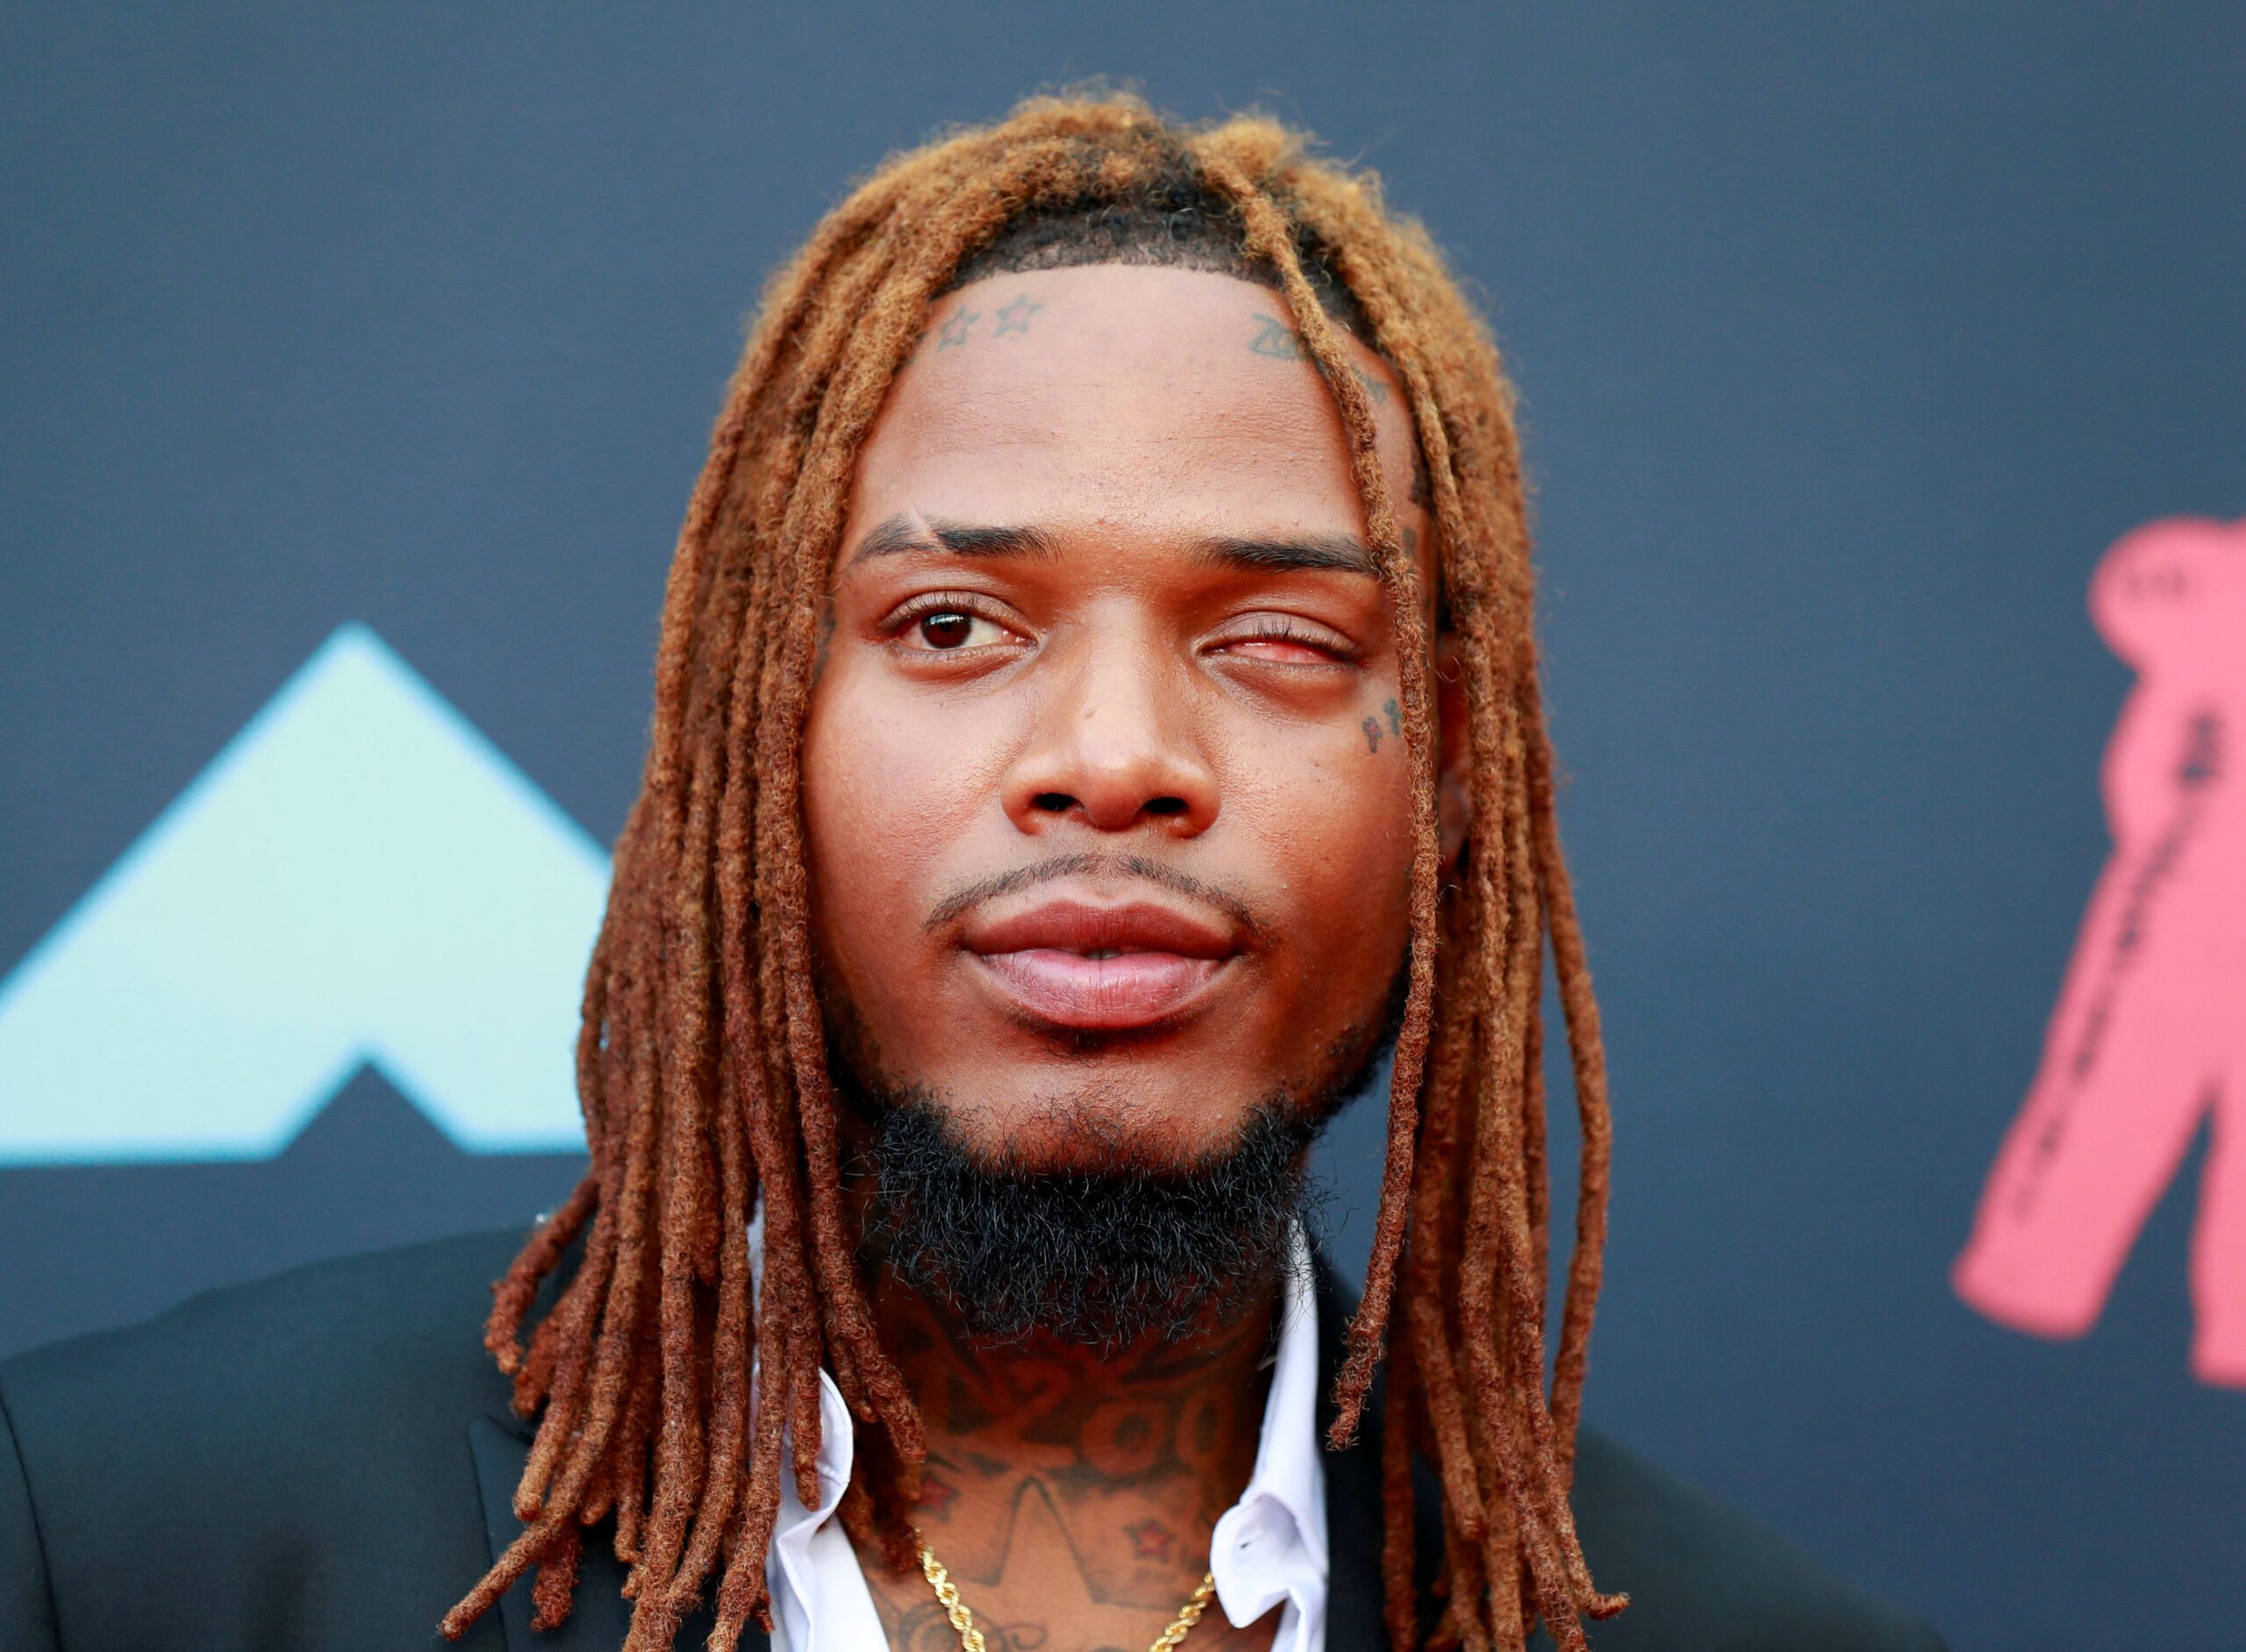 Rapper Fetty Wap sentenced to 6 years in prison for selling cocaine